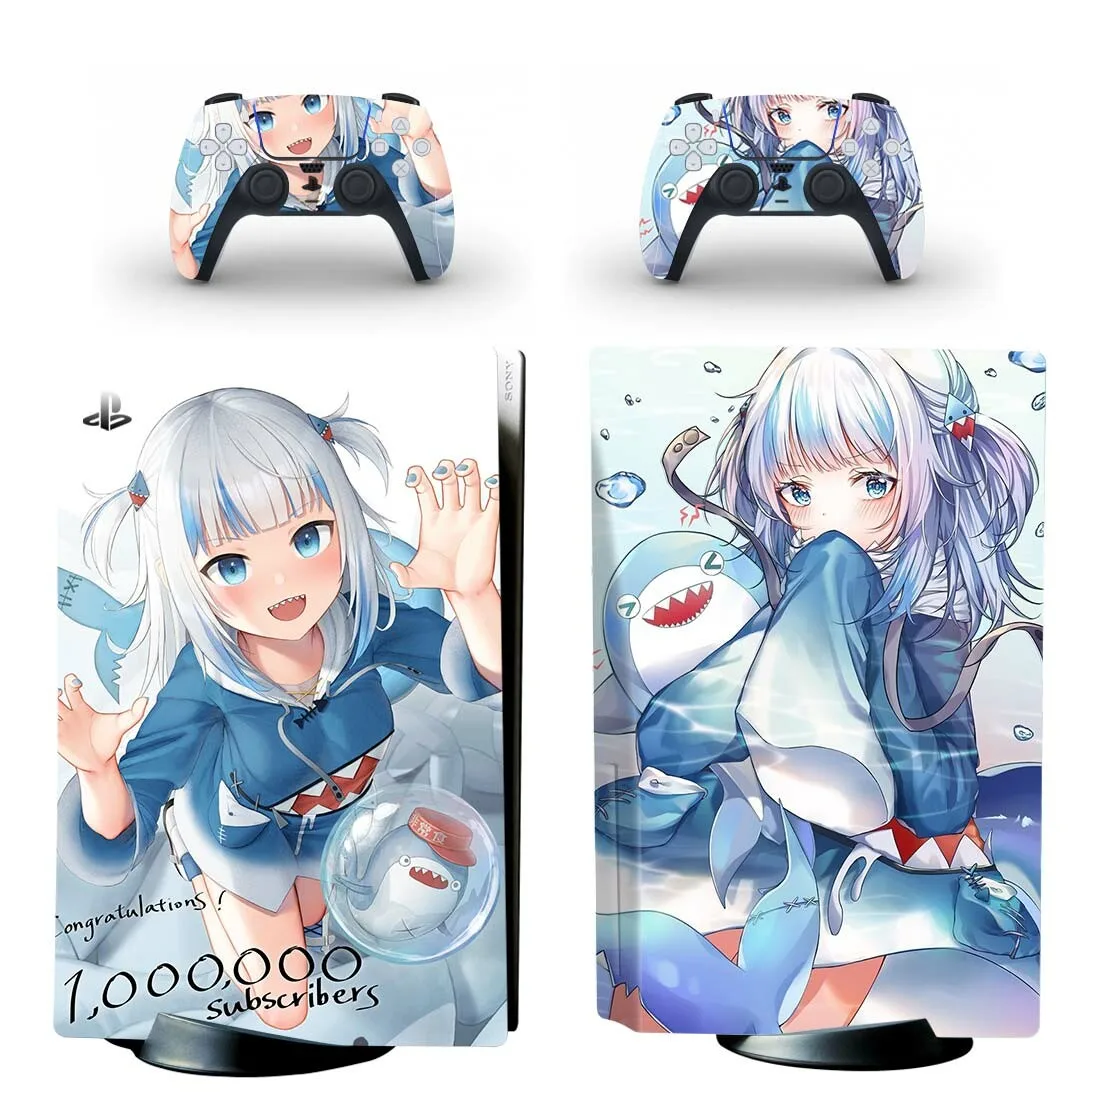 Anime Cuge Girl Gawr Gura PS5 Standard Disc Sticker Decal Cover for PlayStation 5 Console and 2 Controllers PS5 Disk Skin Vinyl